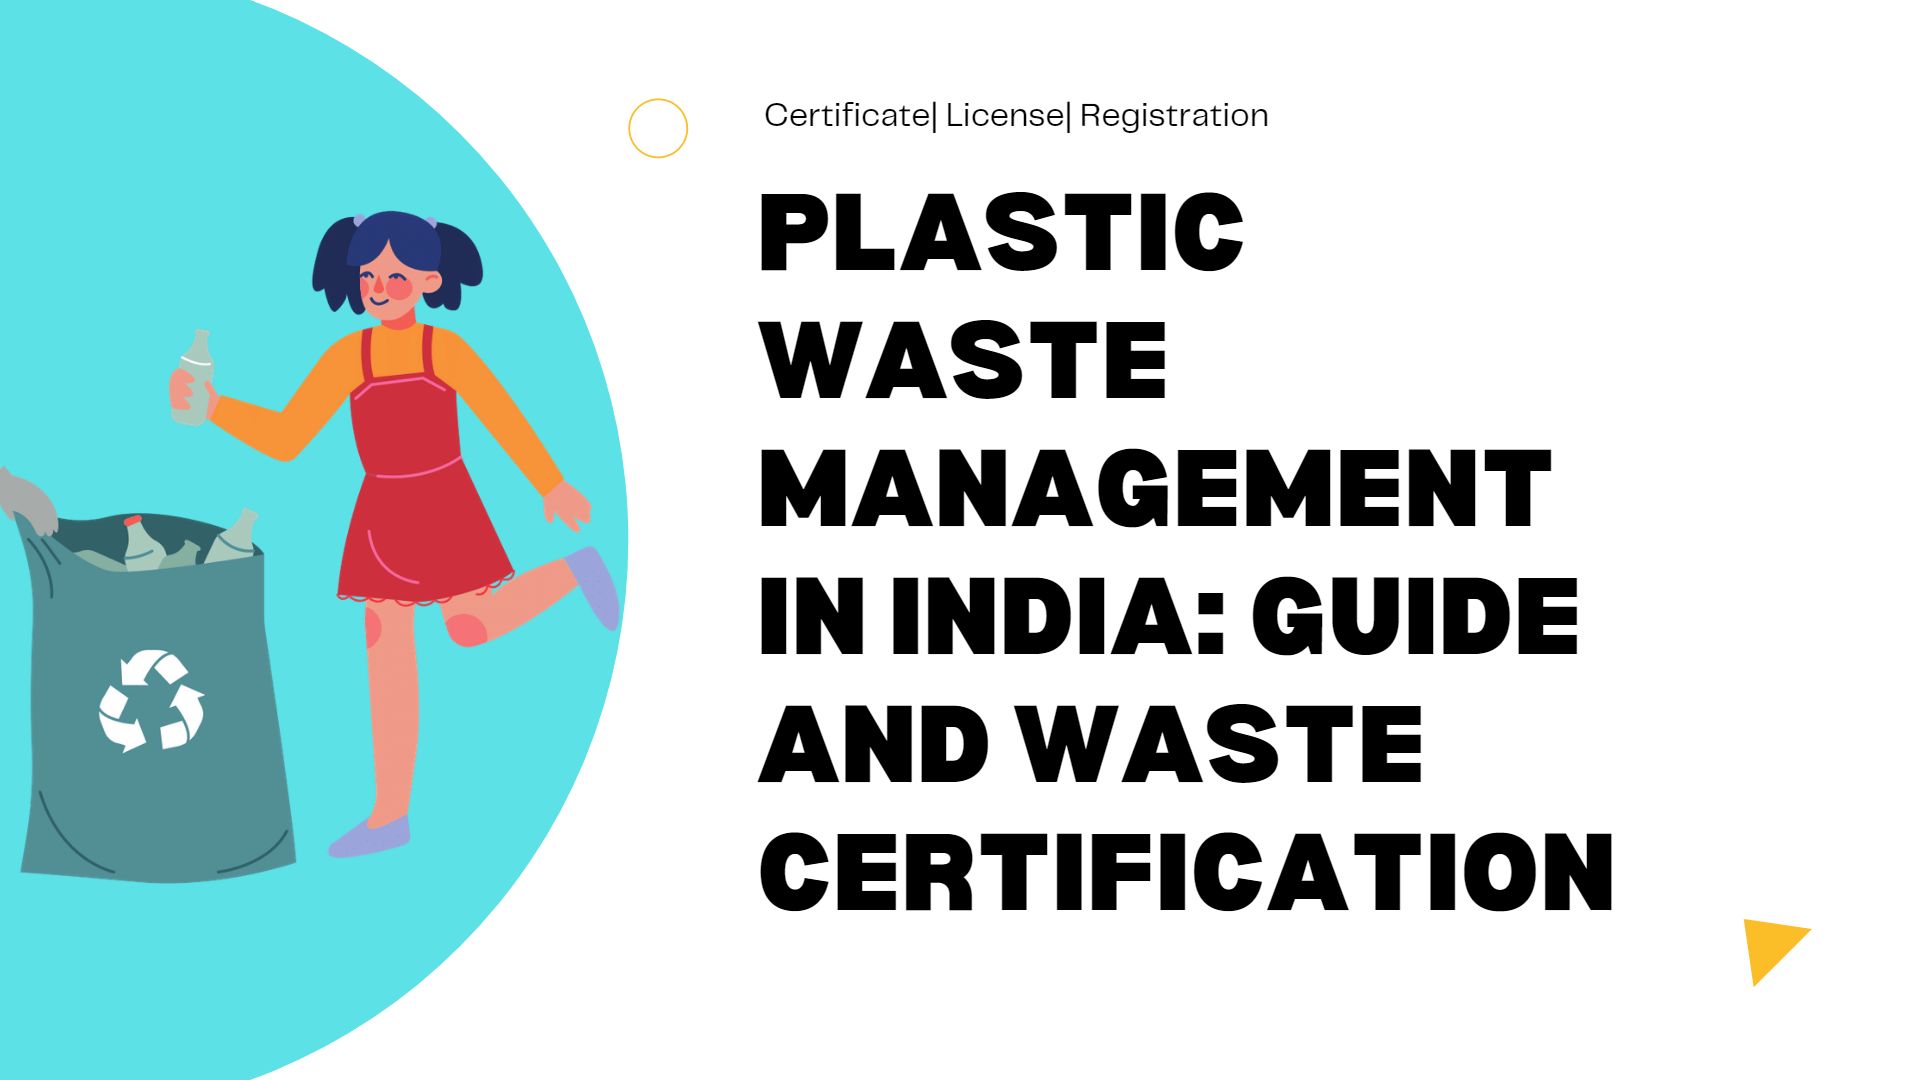 Plastic Waste Management in India Guide and Waste Certification